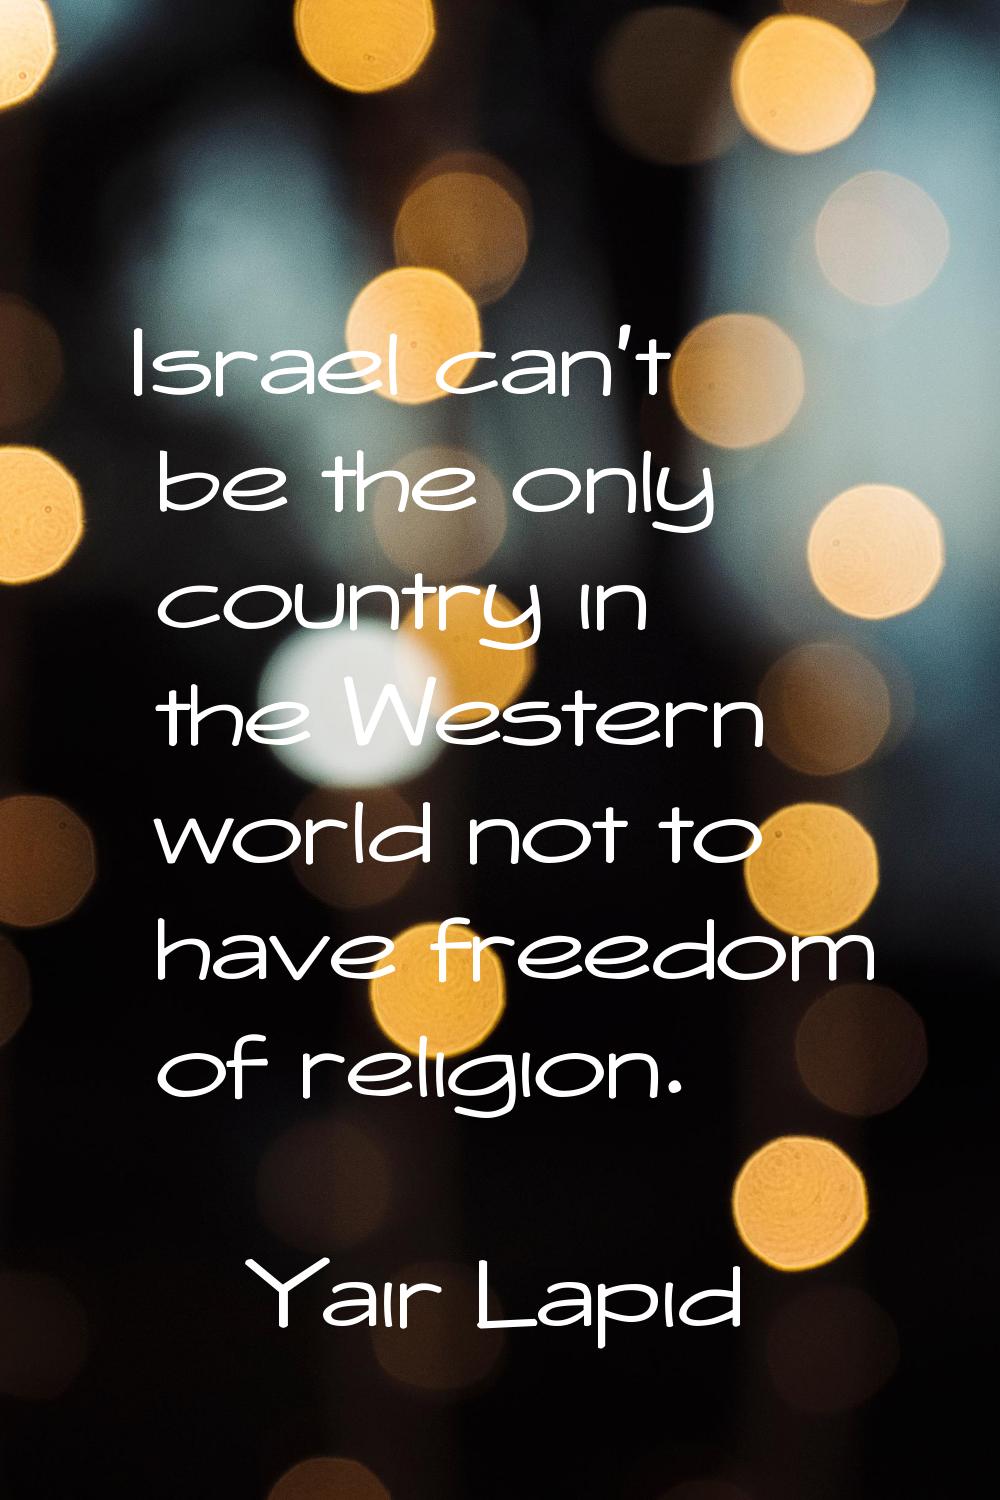 Israel can't be the only country in the Western world not to have freedom of religion.